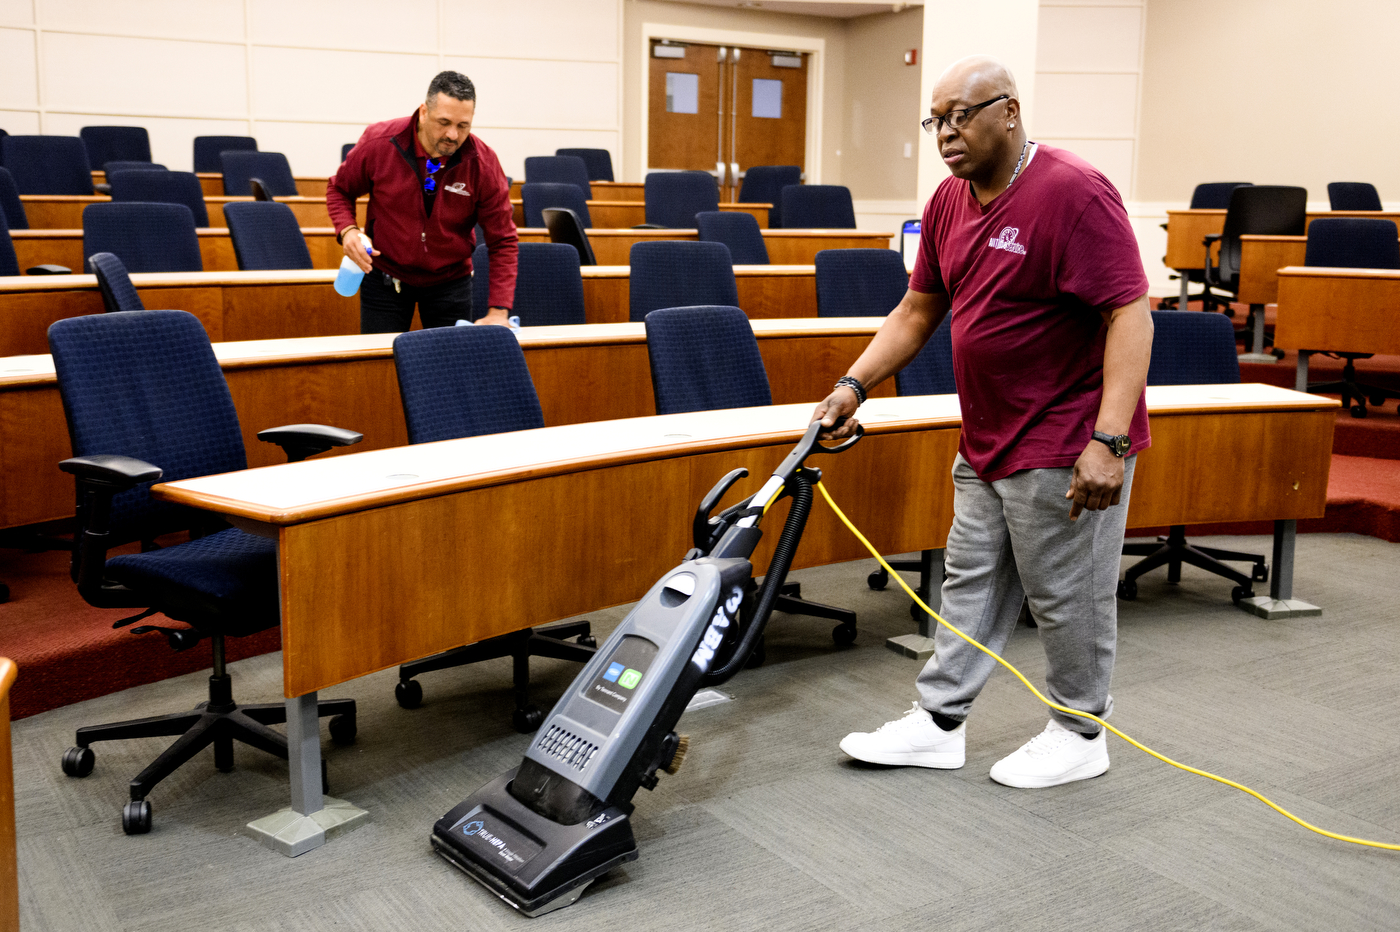 Someone wiping down desks while another person vacuums